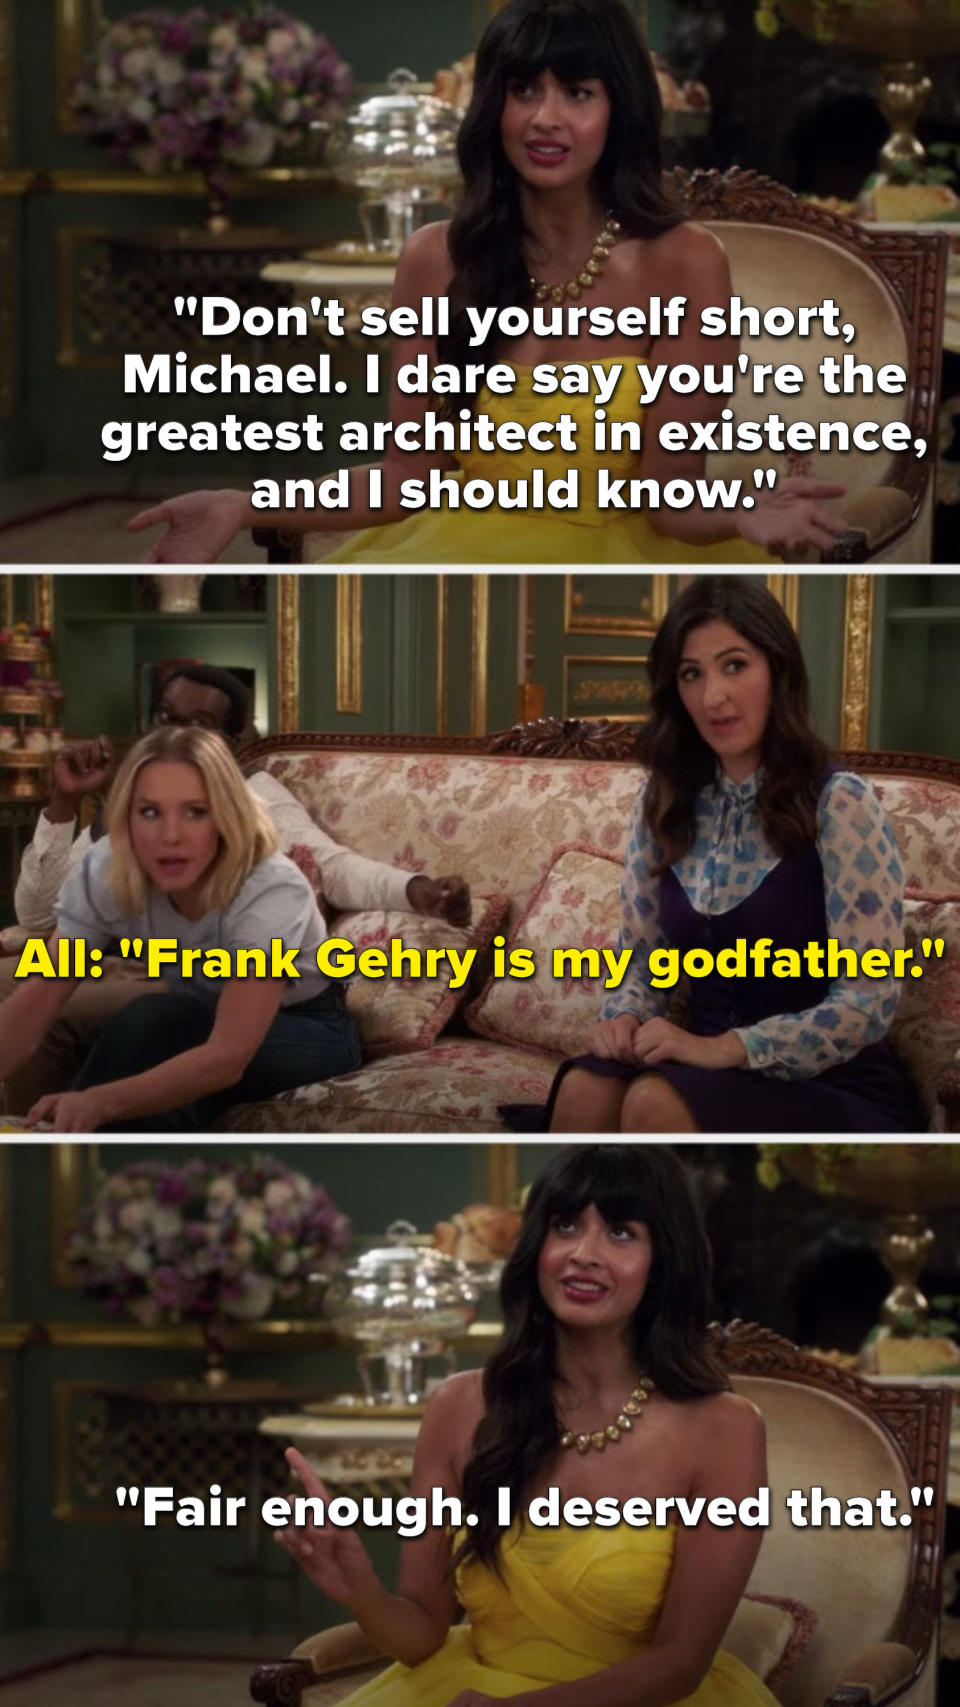 Tahani says, Don't sell yourself short, Michael, I dare say you're the greatest architect in existence, and I should know, then everyone with Tahani says, Frank Gehry is my godfather, and Tahani says, Fair enough, I deserved that